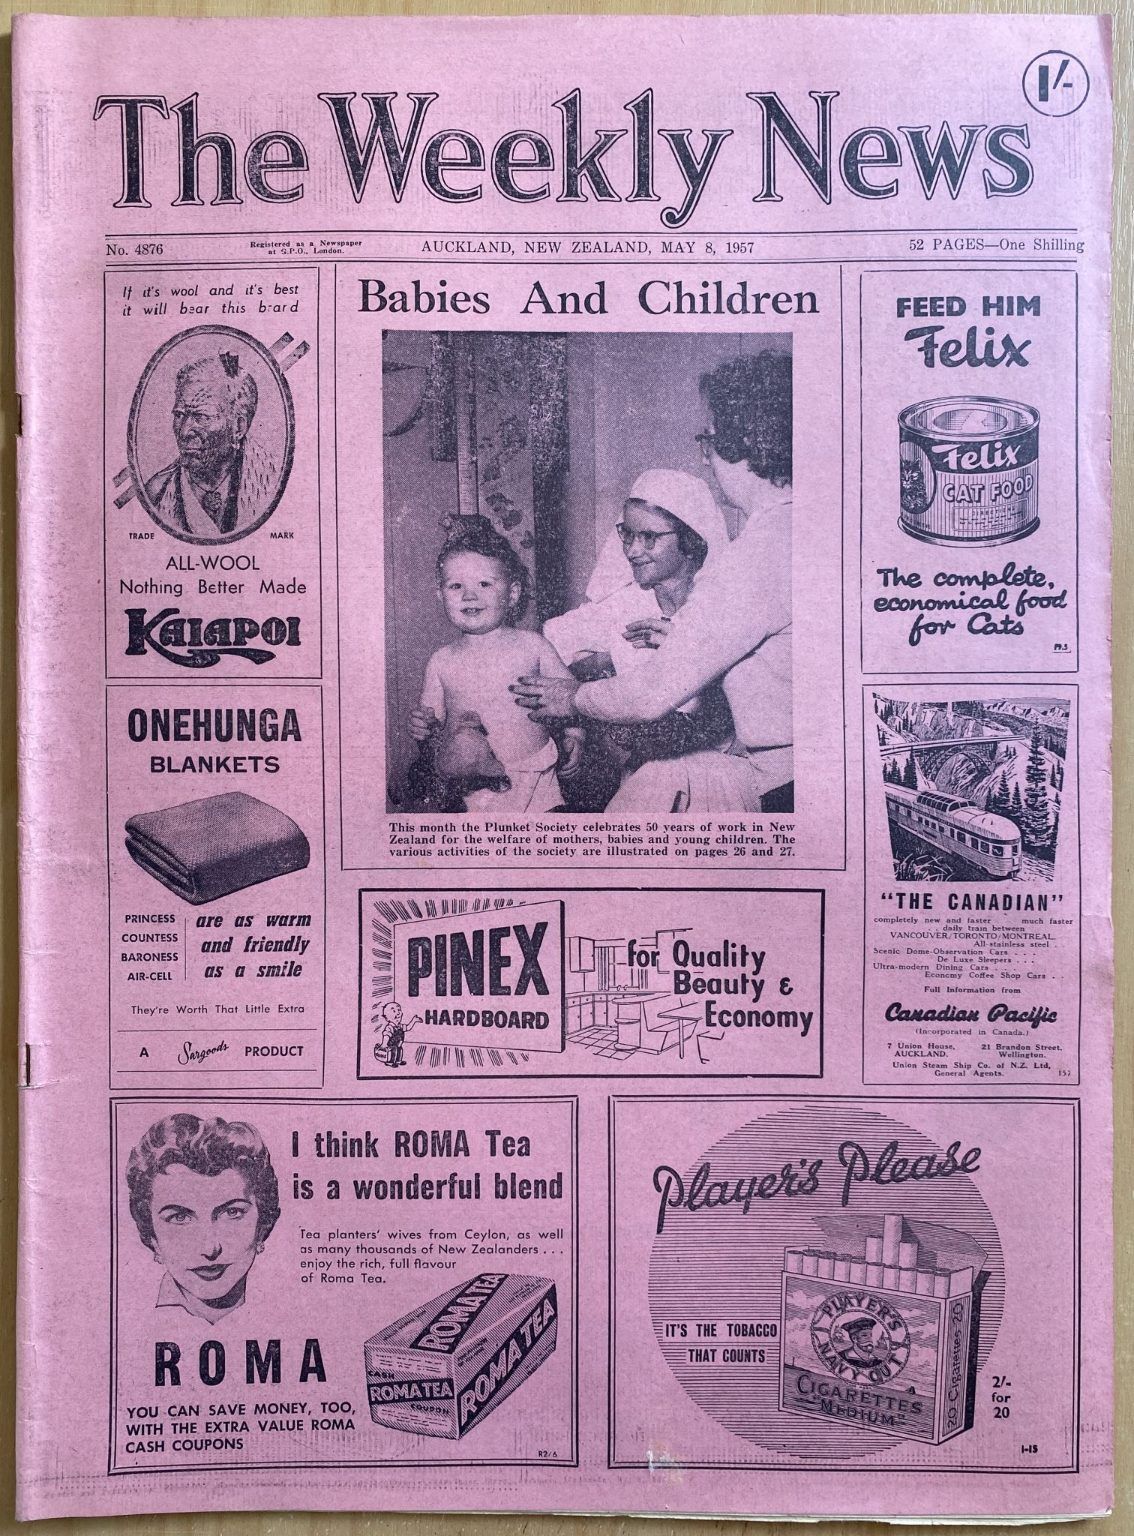 OLD NEWSPAPER: The Weekly News, No. 4876, 8 May 1957